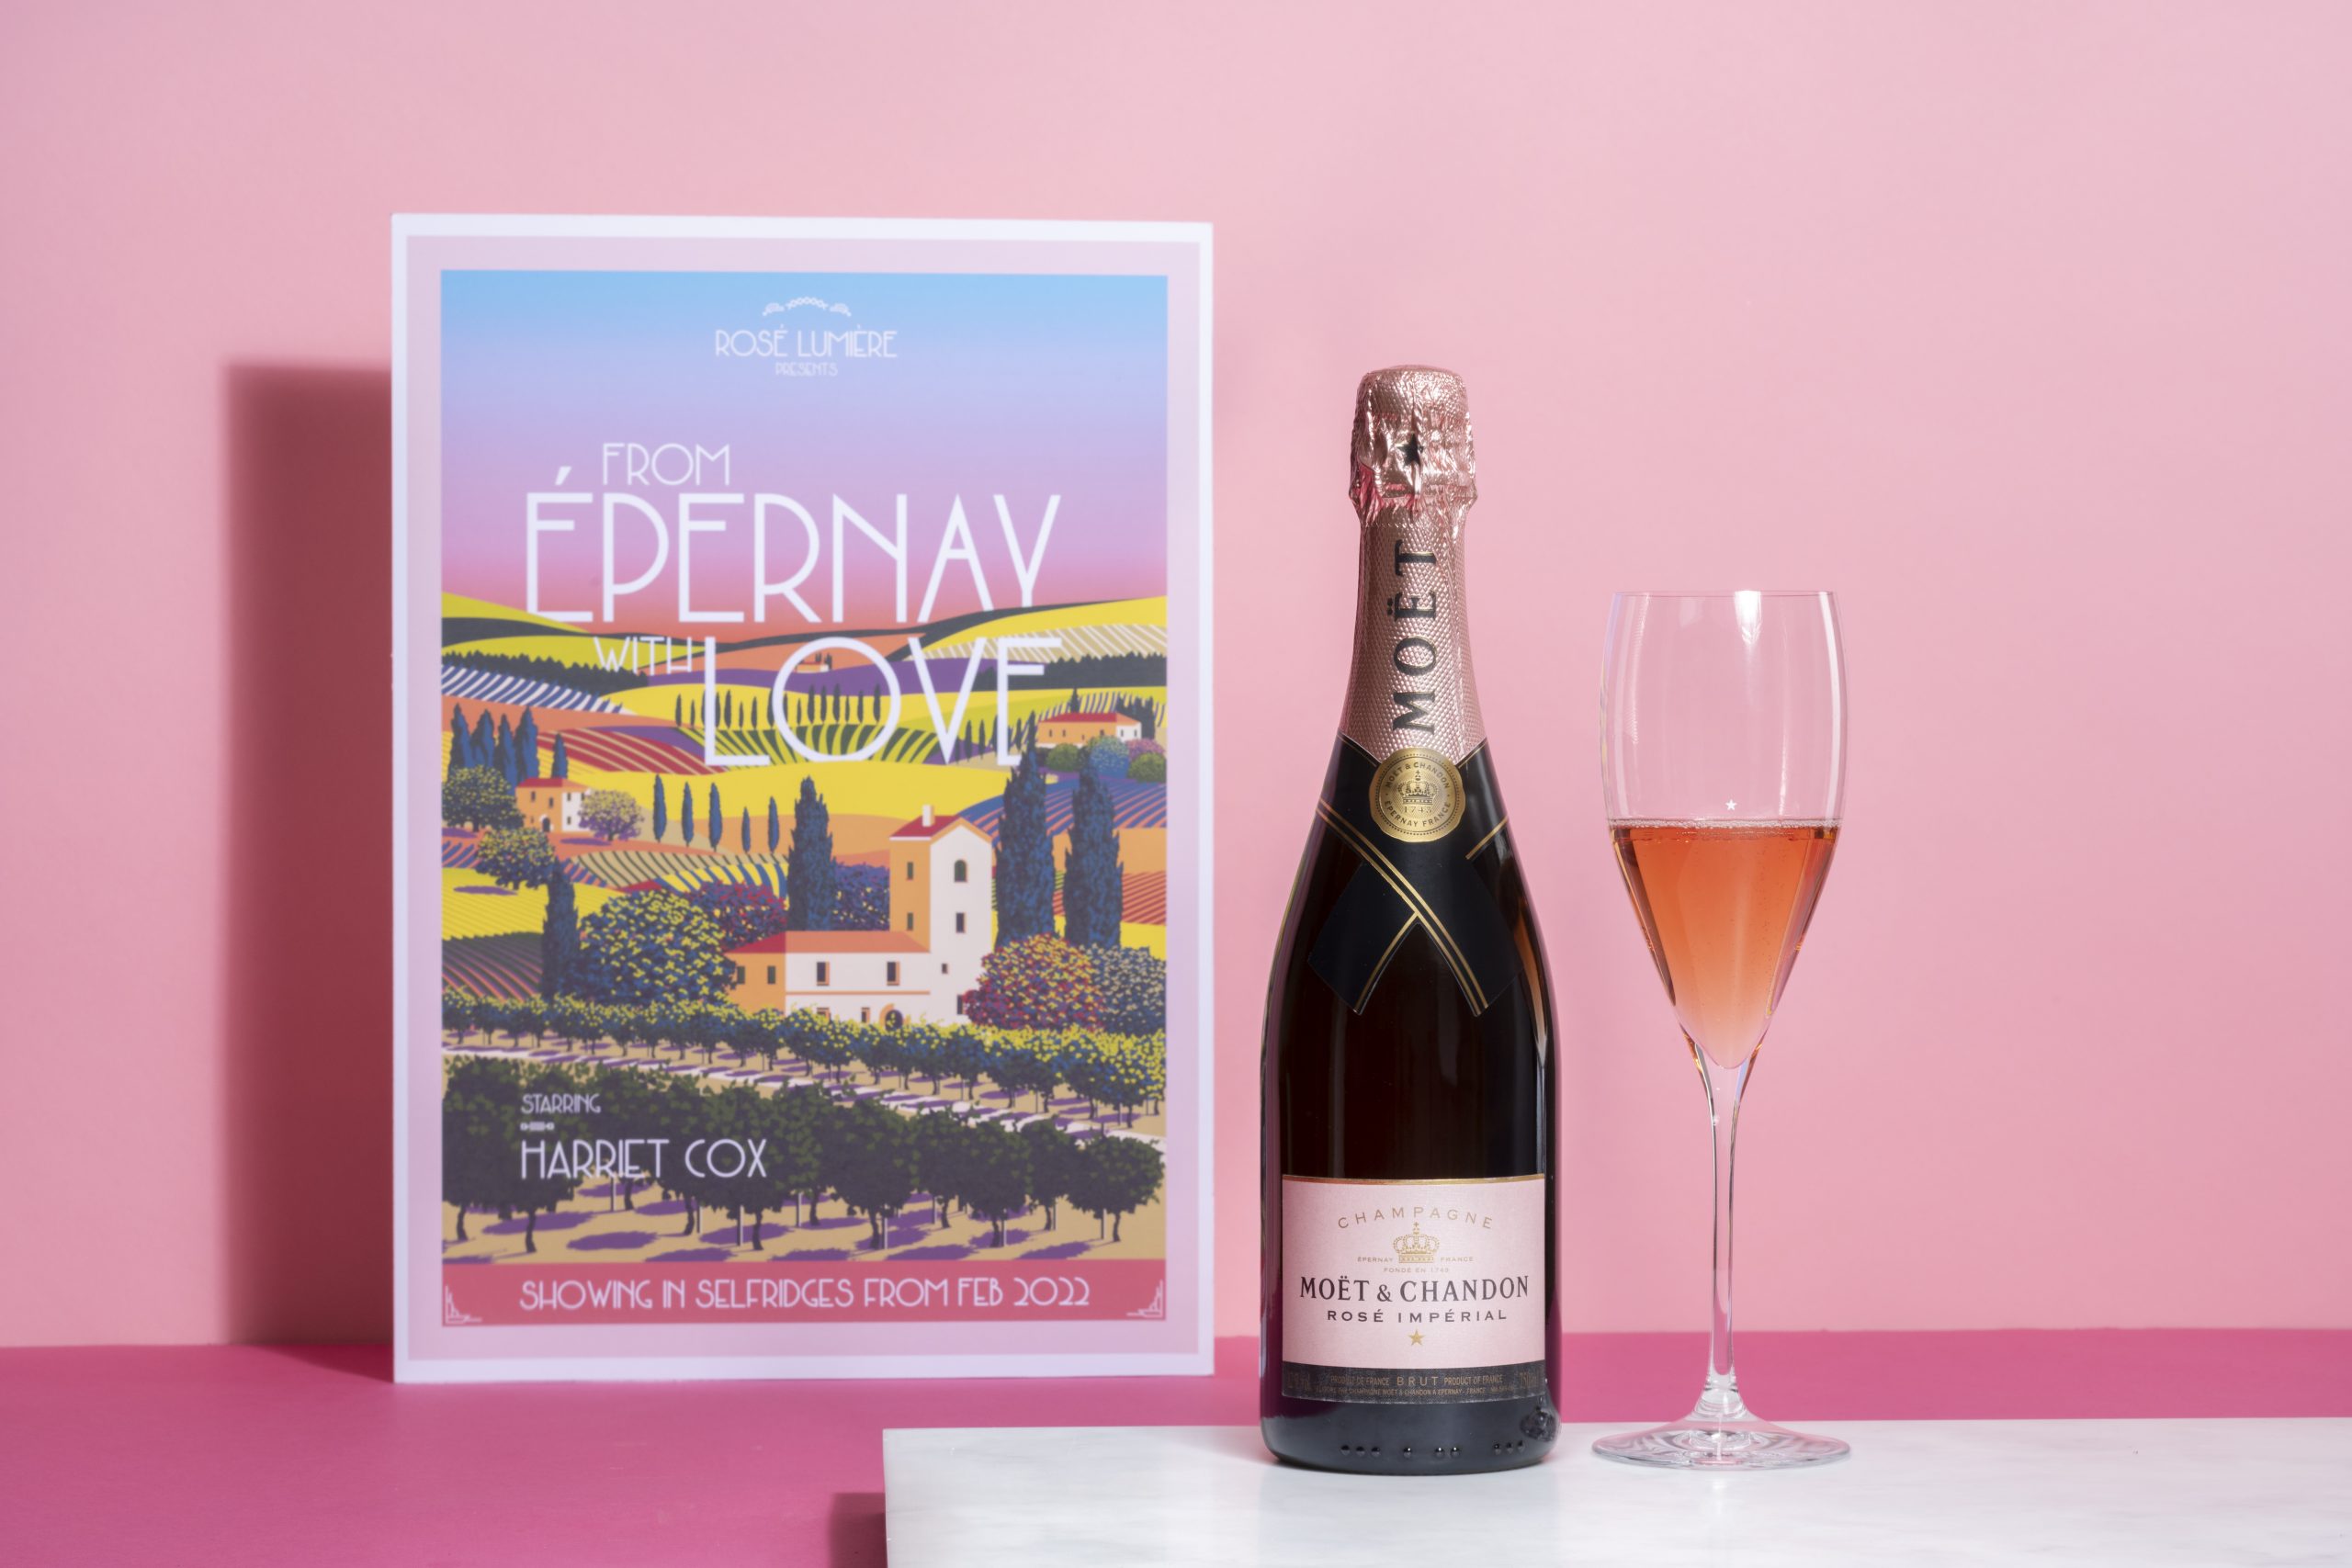 Moët Hennessy taps into growing popularity of rosé Champagne with new experience